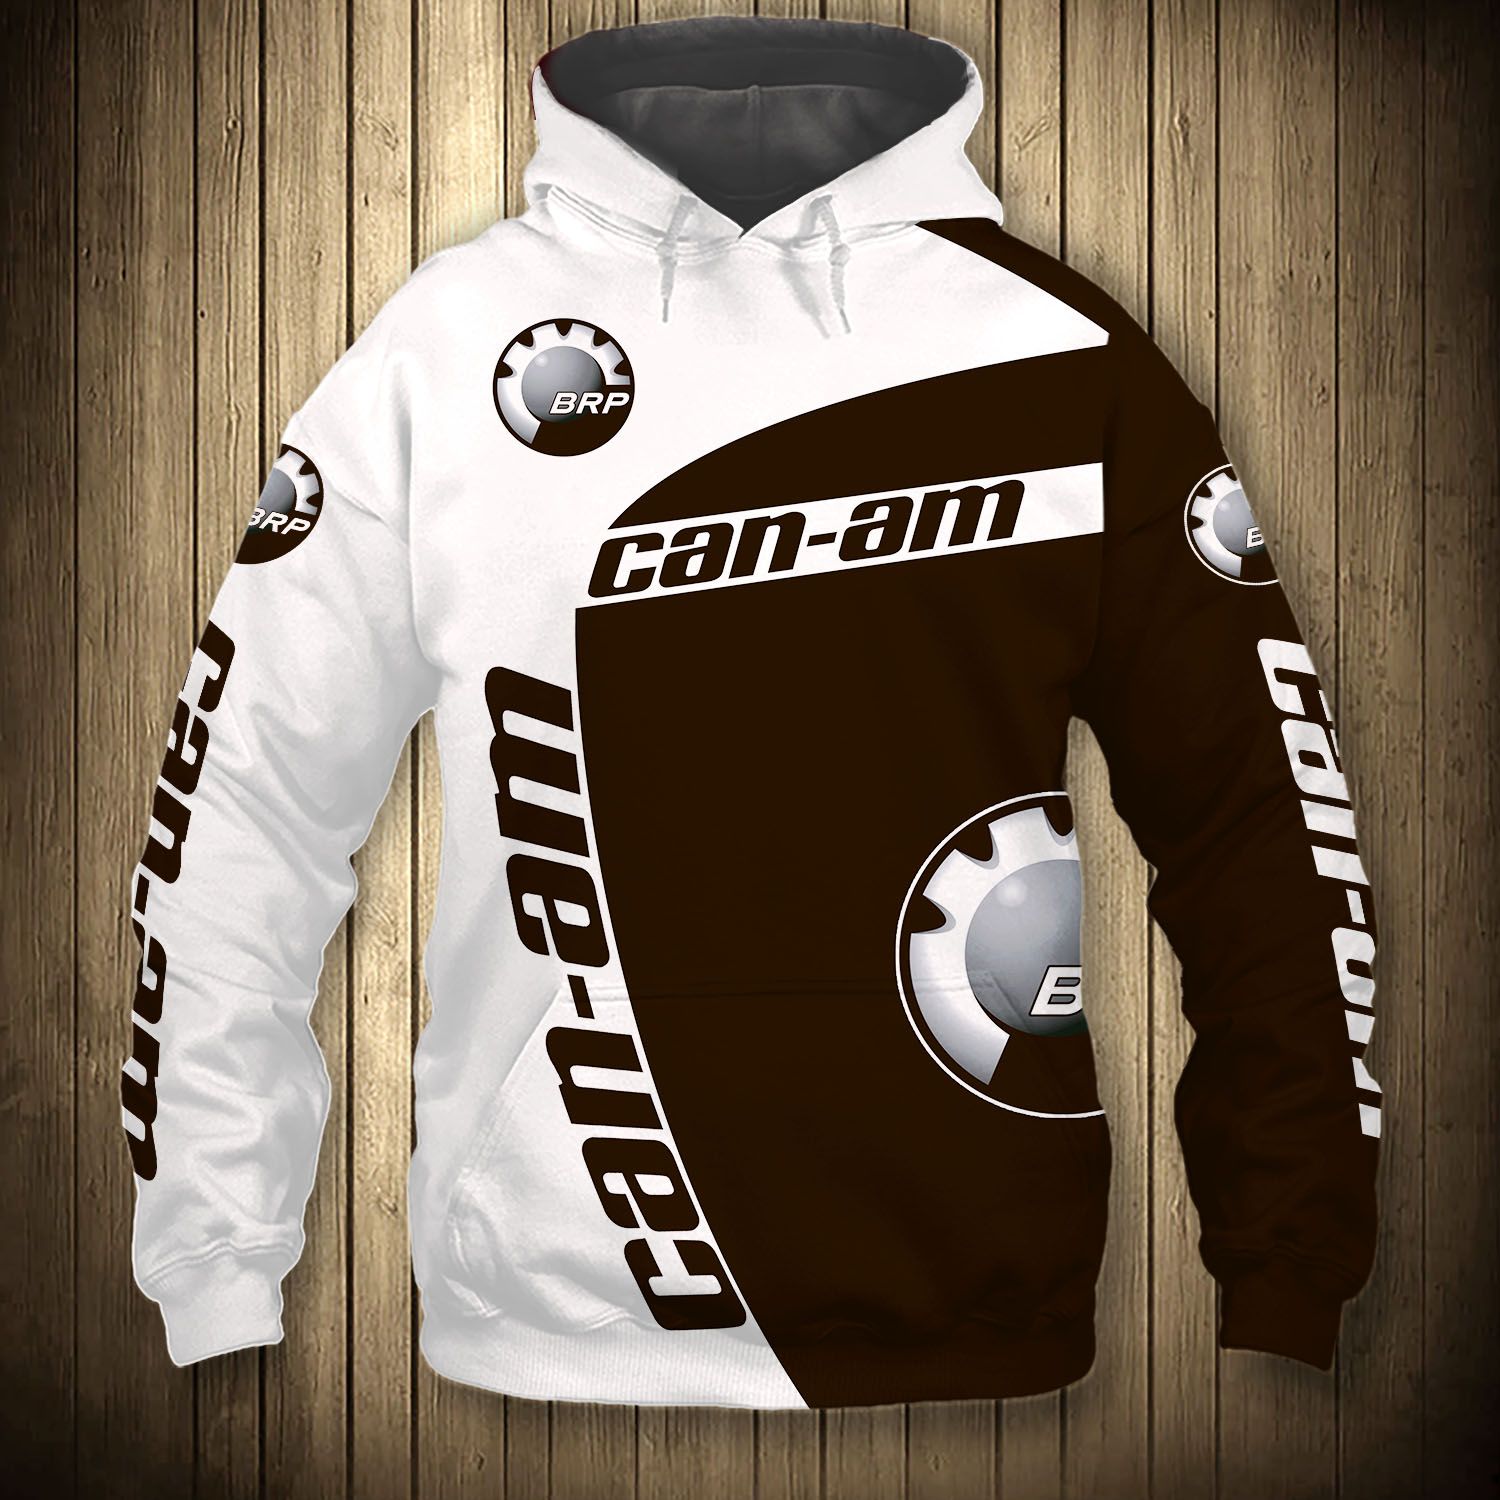 Can-Am Motorcycles Printing T-Shirt, Polo, Hoodie, Zip, Bomber 276